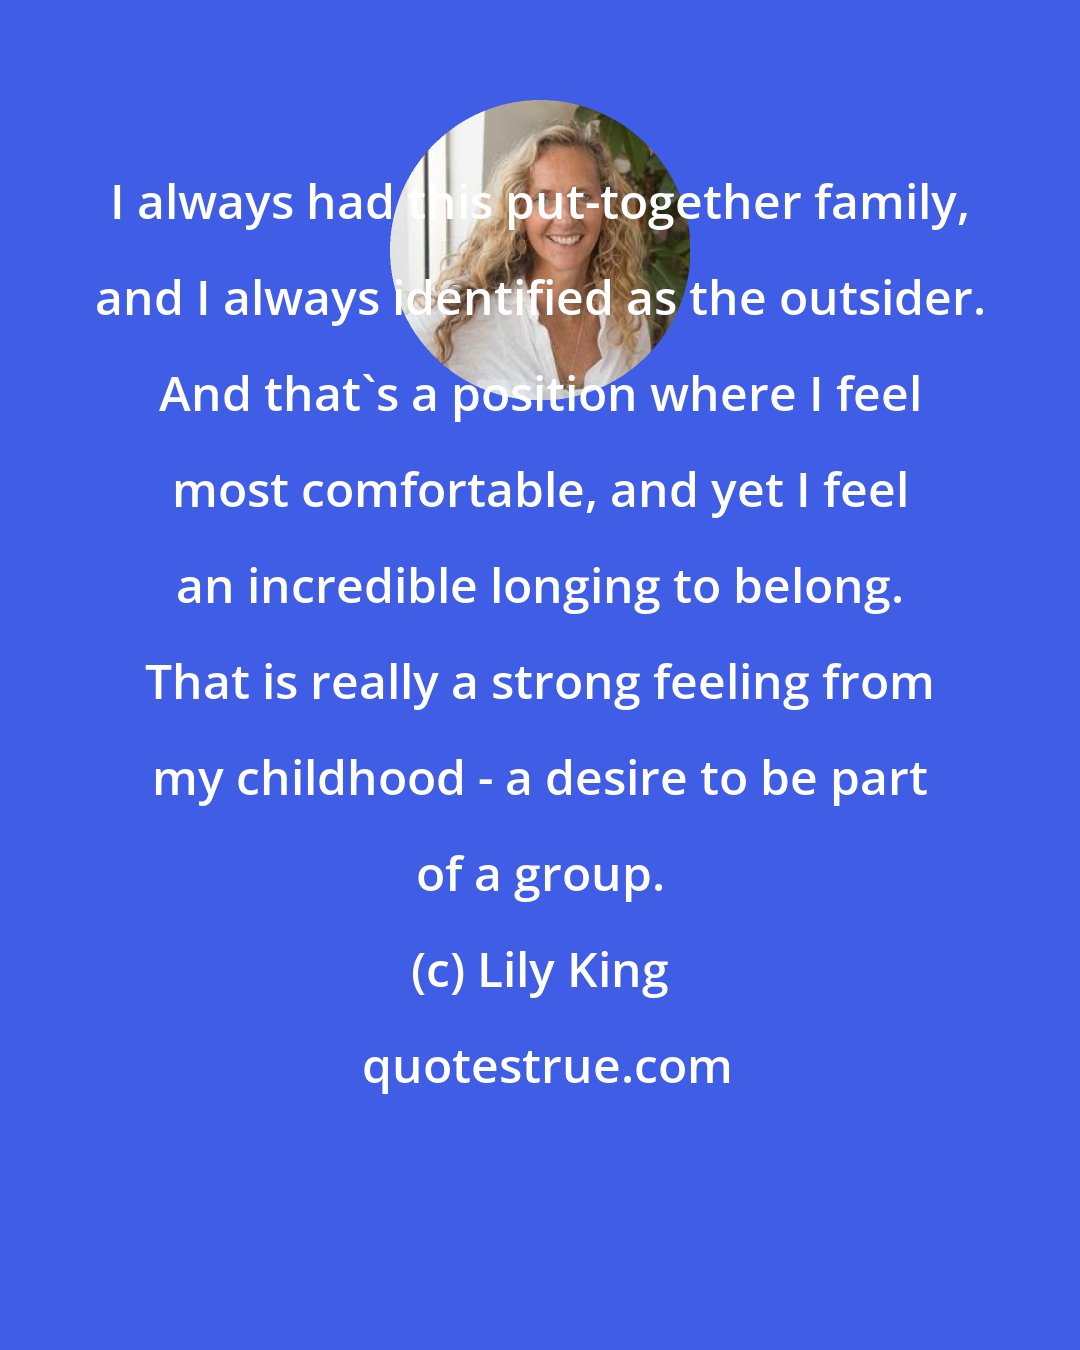 Lily King: I always had this put-together family, and I always identified as the outsider. And that's a position where I feel most comfortable, and yet I feel an incredible longing to belong. That is really a strong feeling from my childhood - a desire to be part of a group.